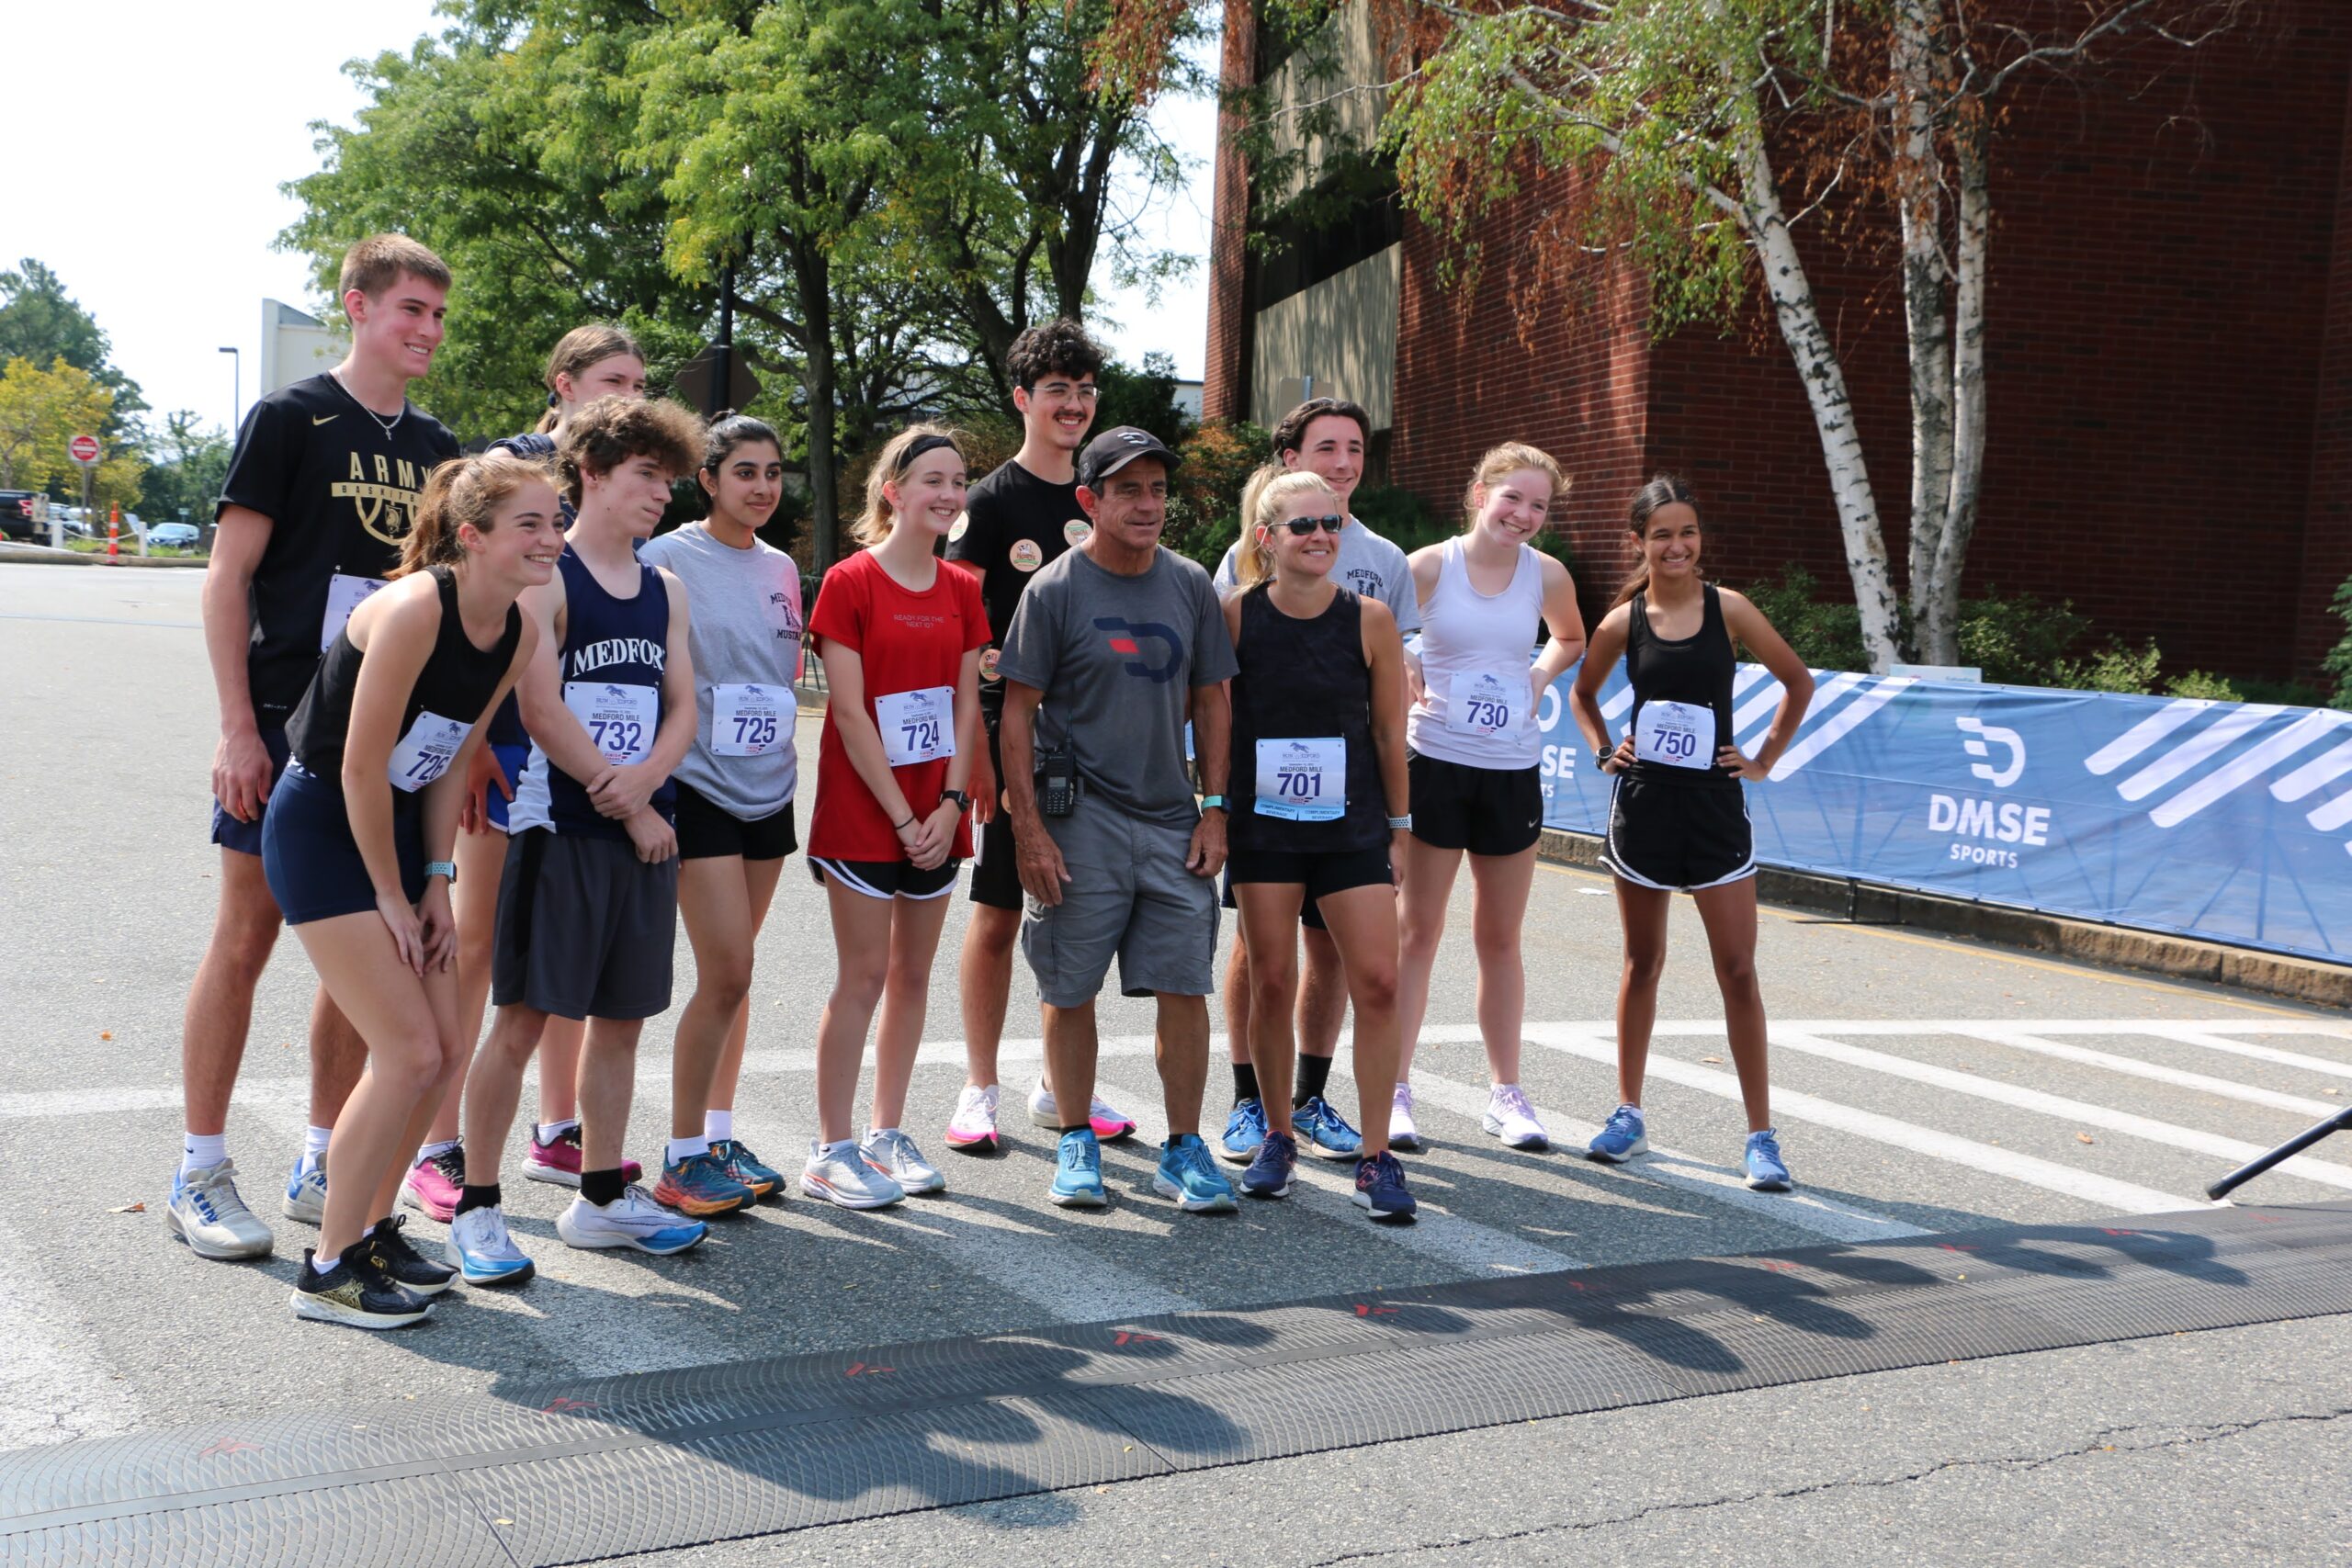 Run Medford returns Sept. 22 and 23 with fivemile run, twomile walk